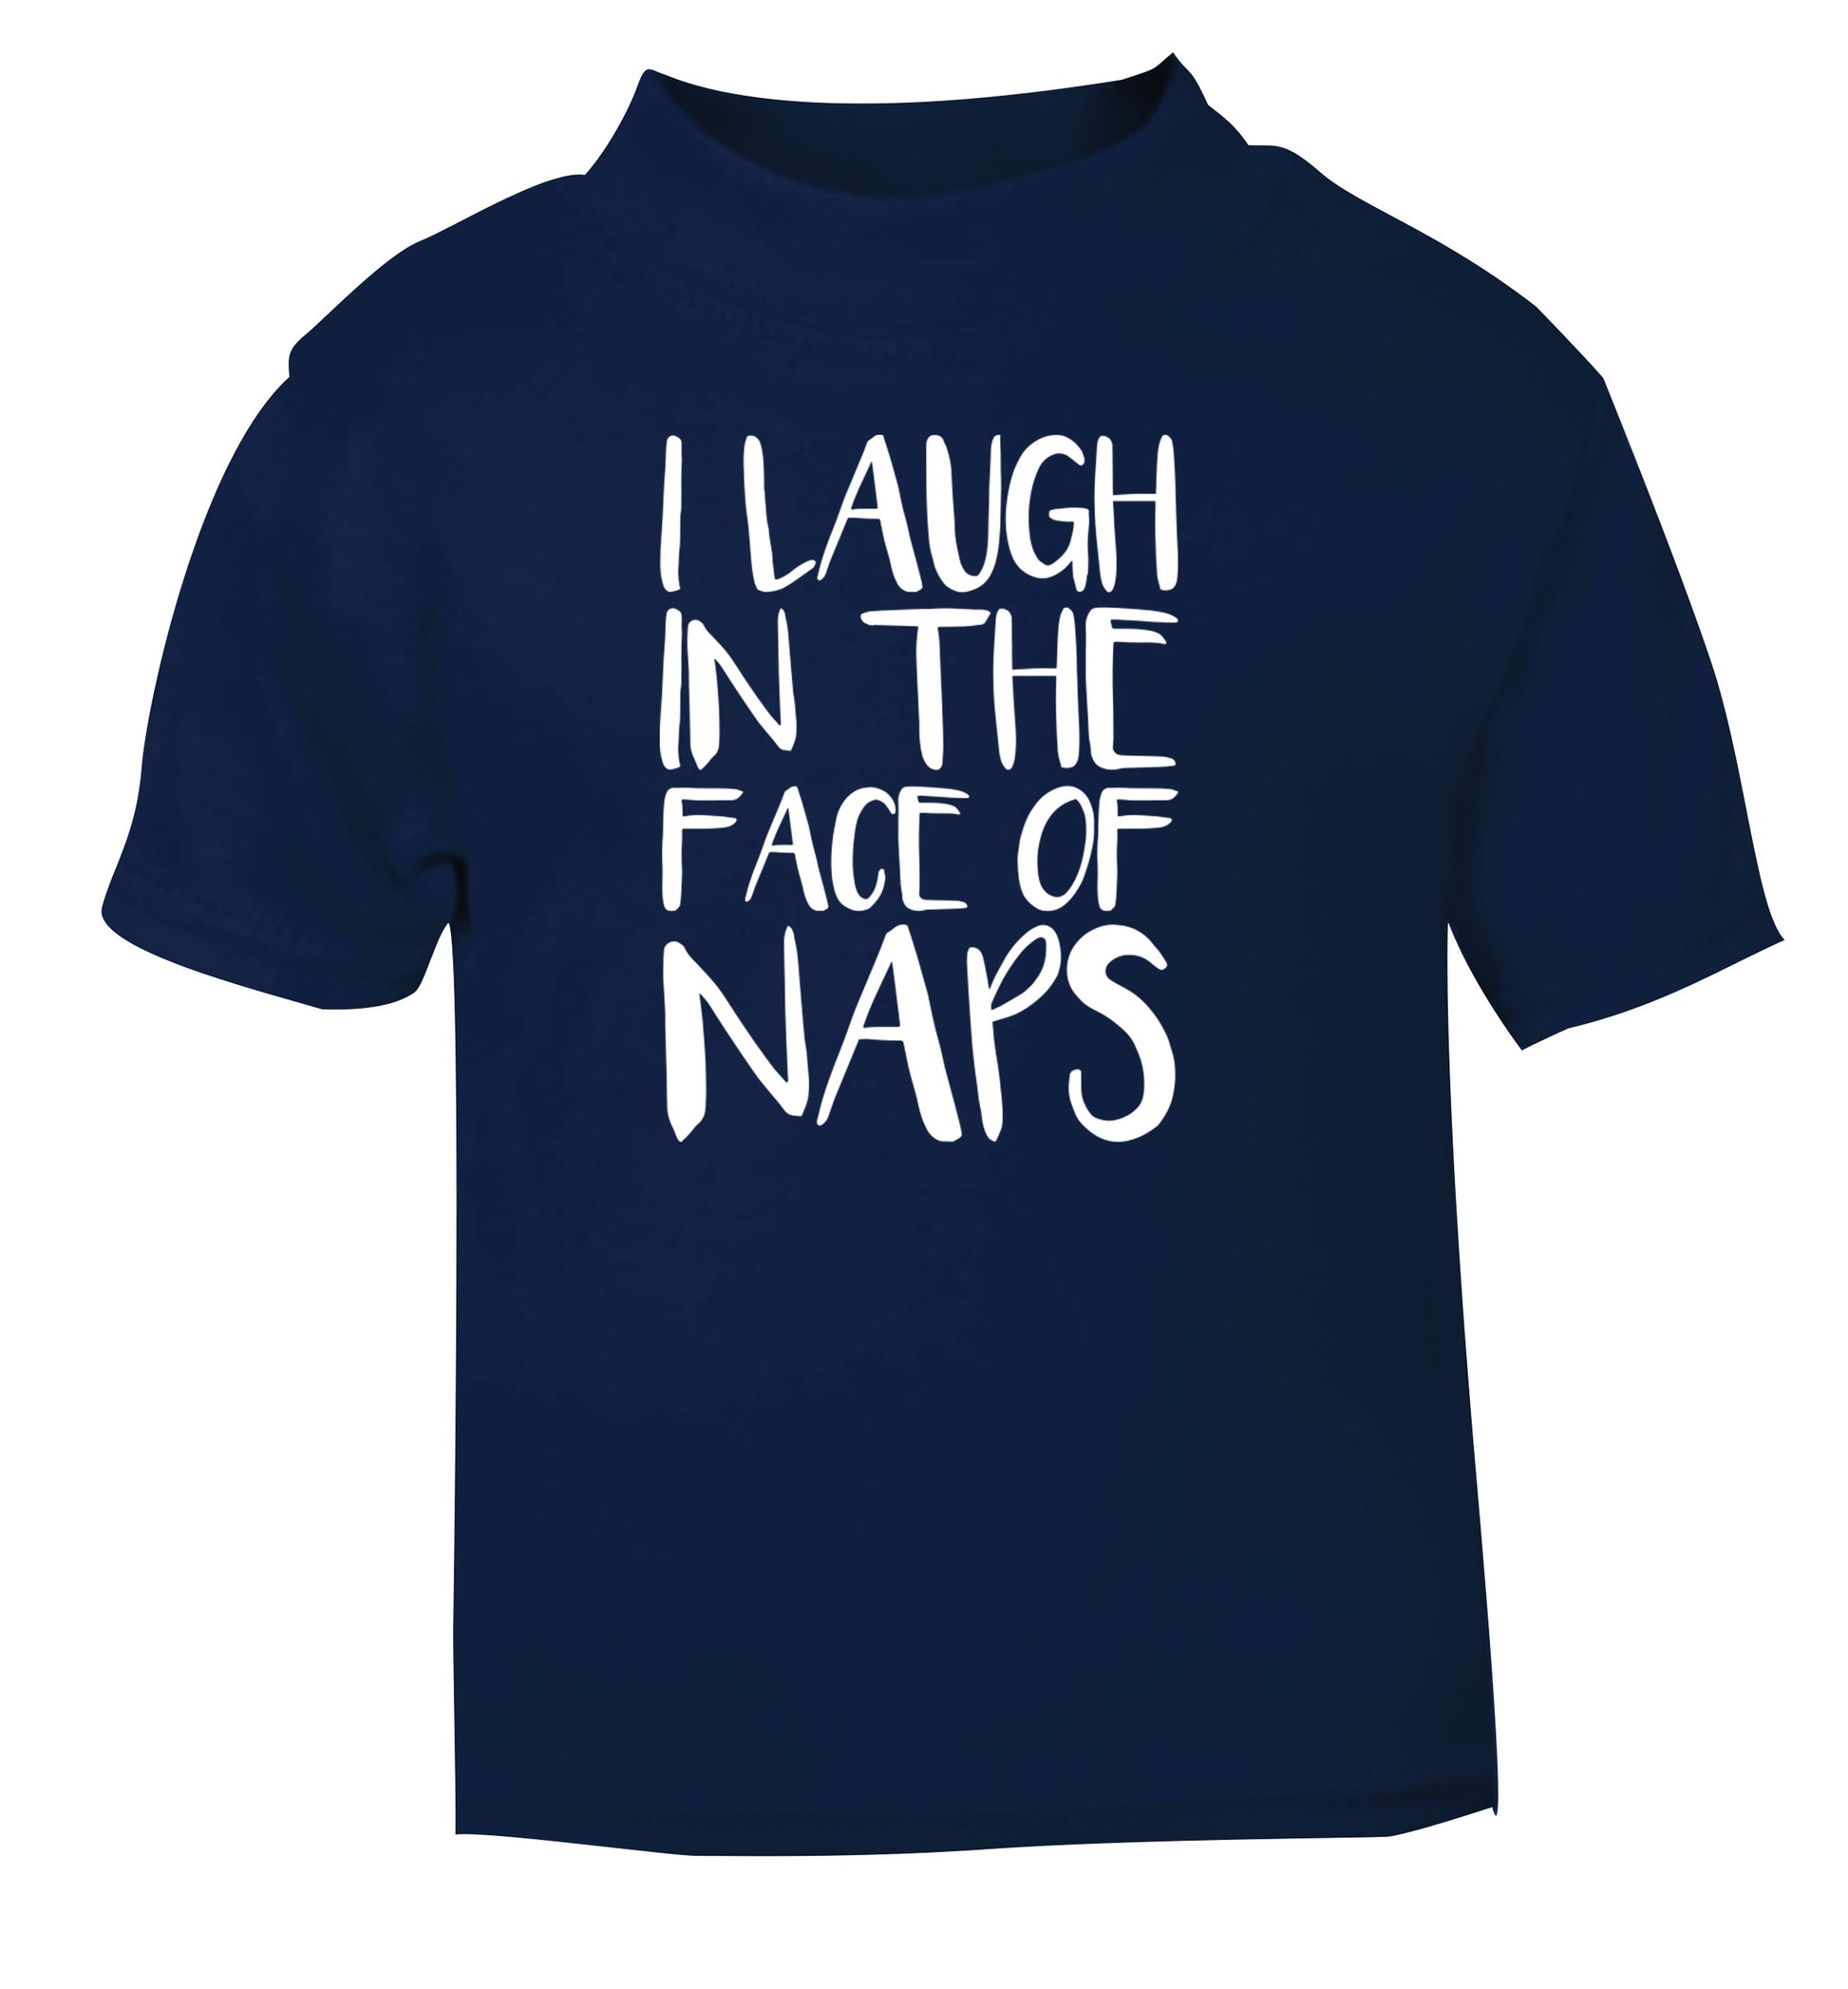 I laugh in the face of naps navy Baby Toddler Tshirt 2 Years